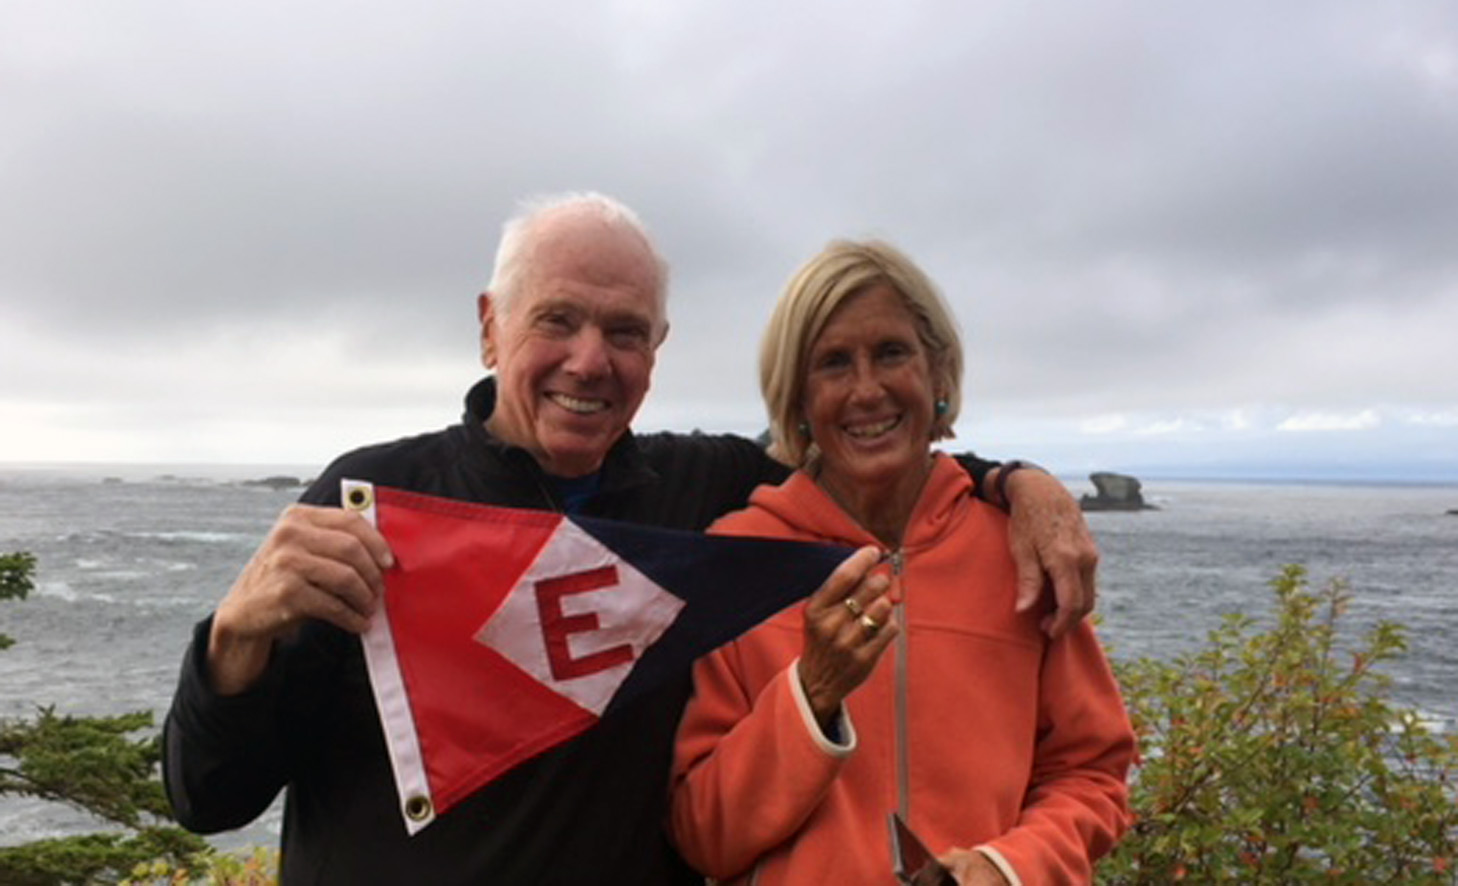  Bill and Nadine show their pride at Cape Flattery, WA—the northwesternmost point of land in the continental United States 